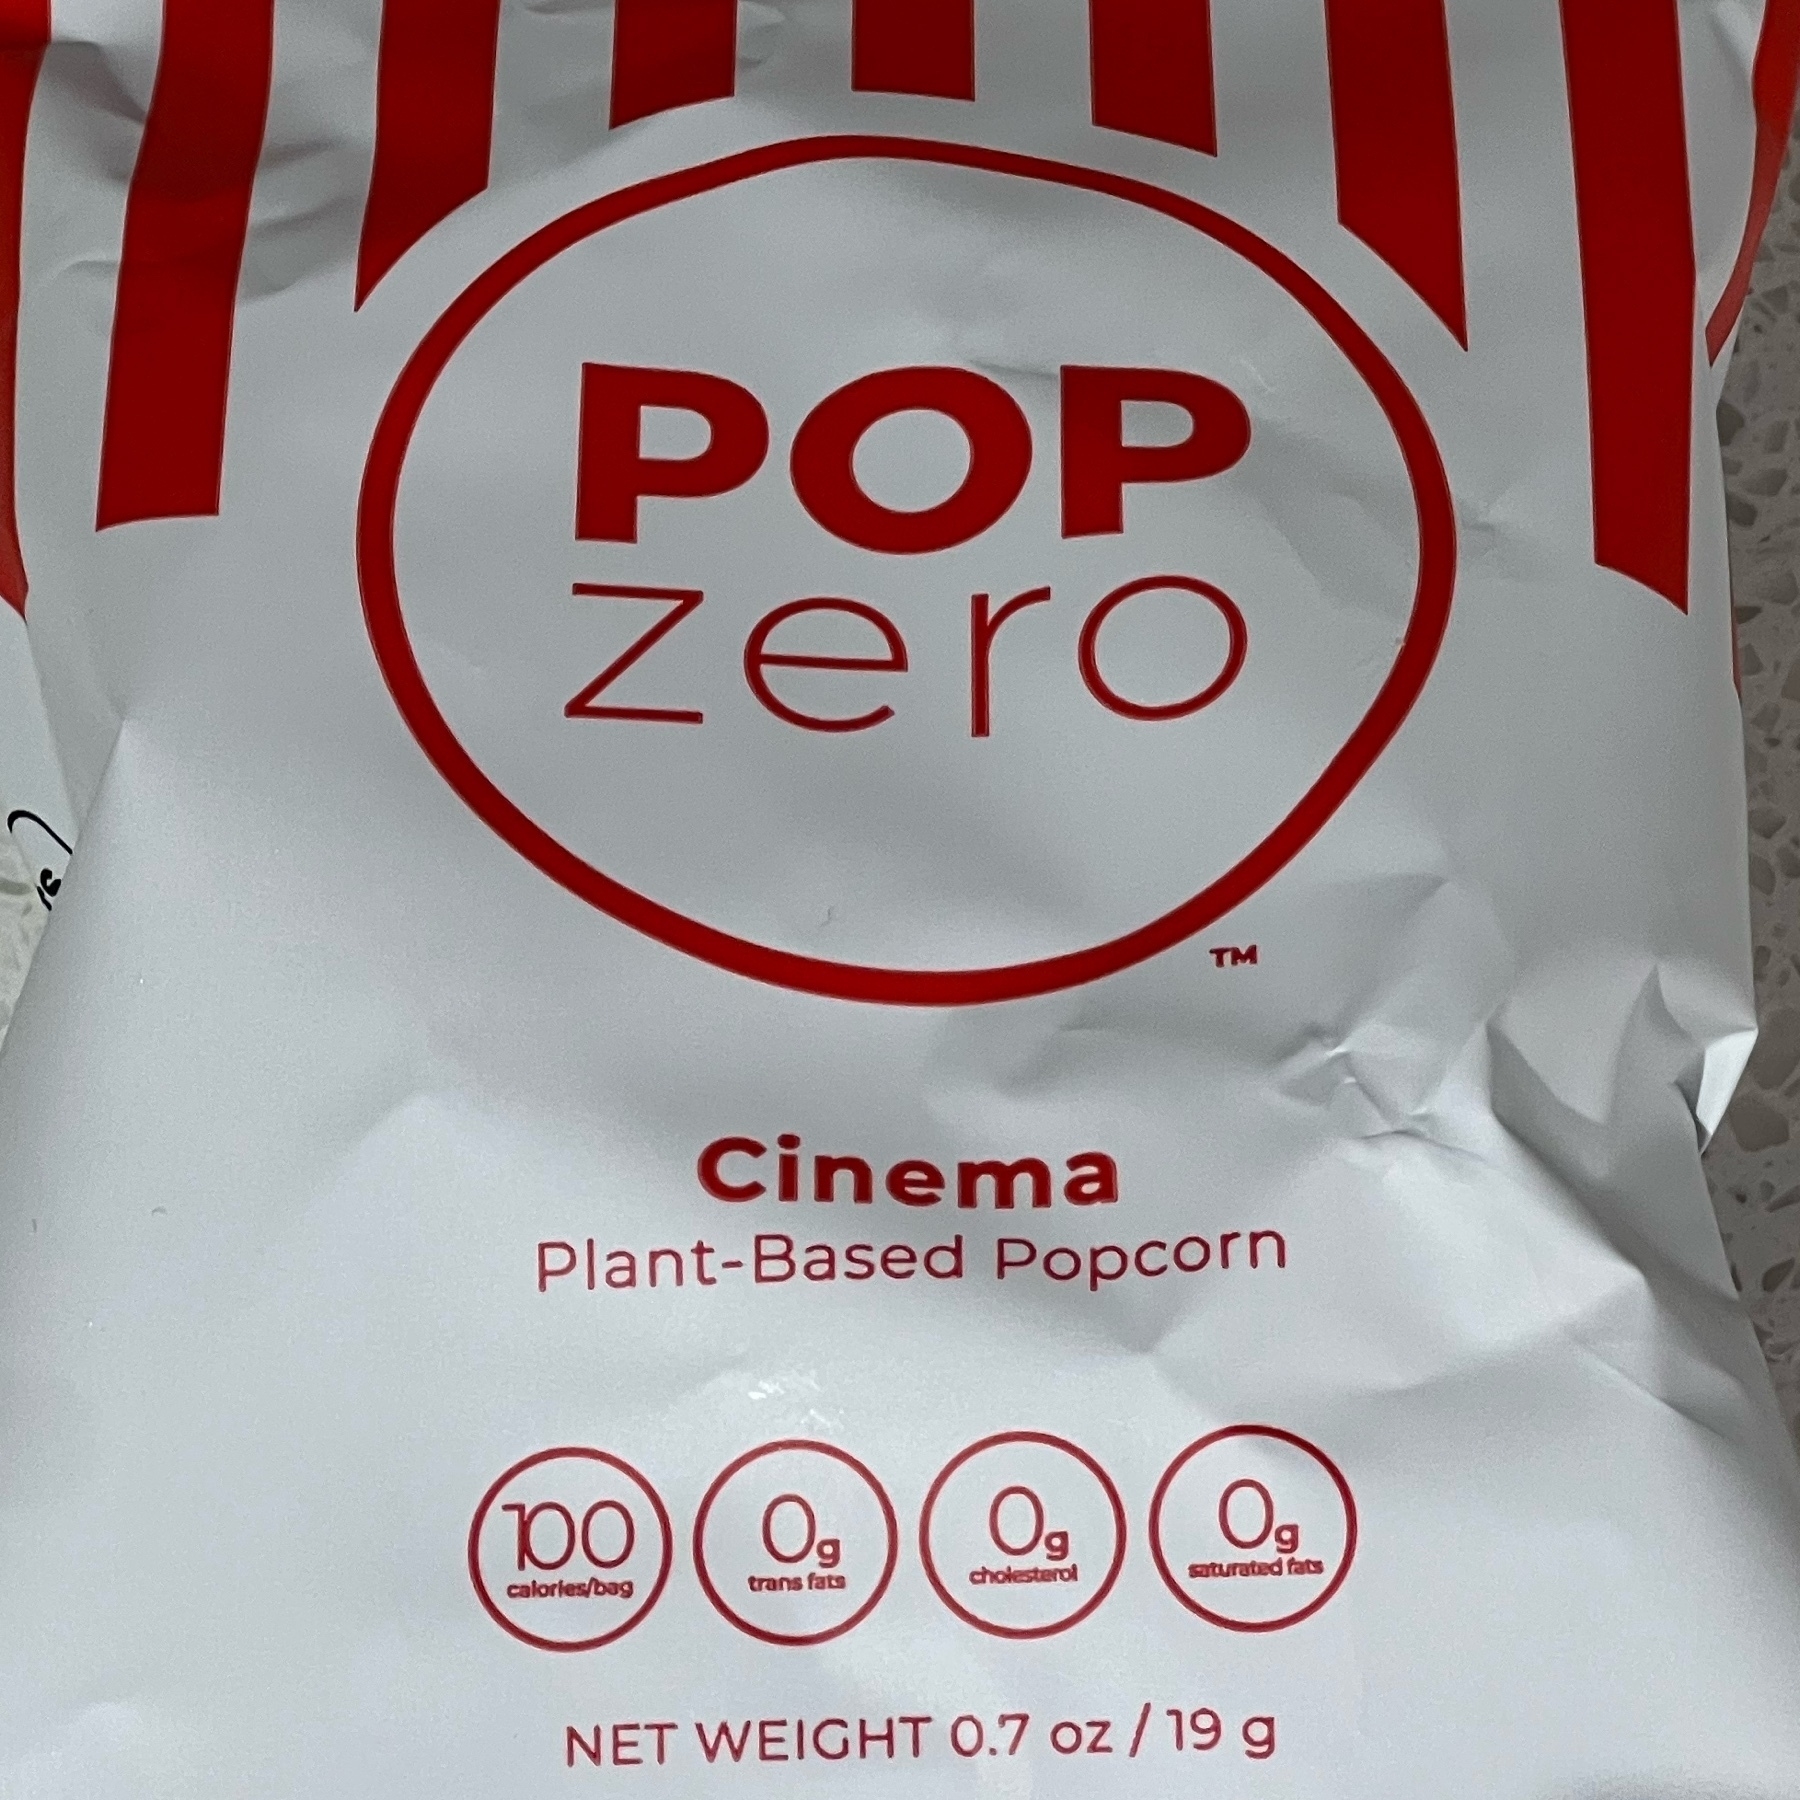 red and white bag of pop zero popcorn cinema flavor that says "Plant based"